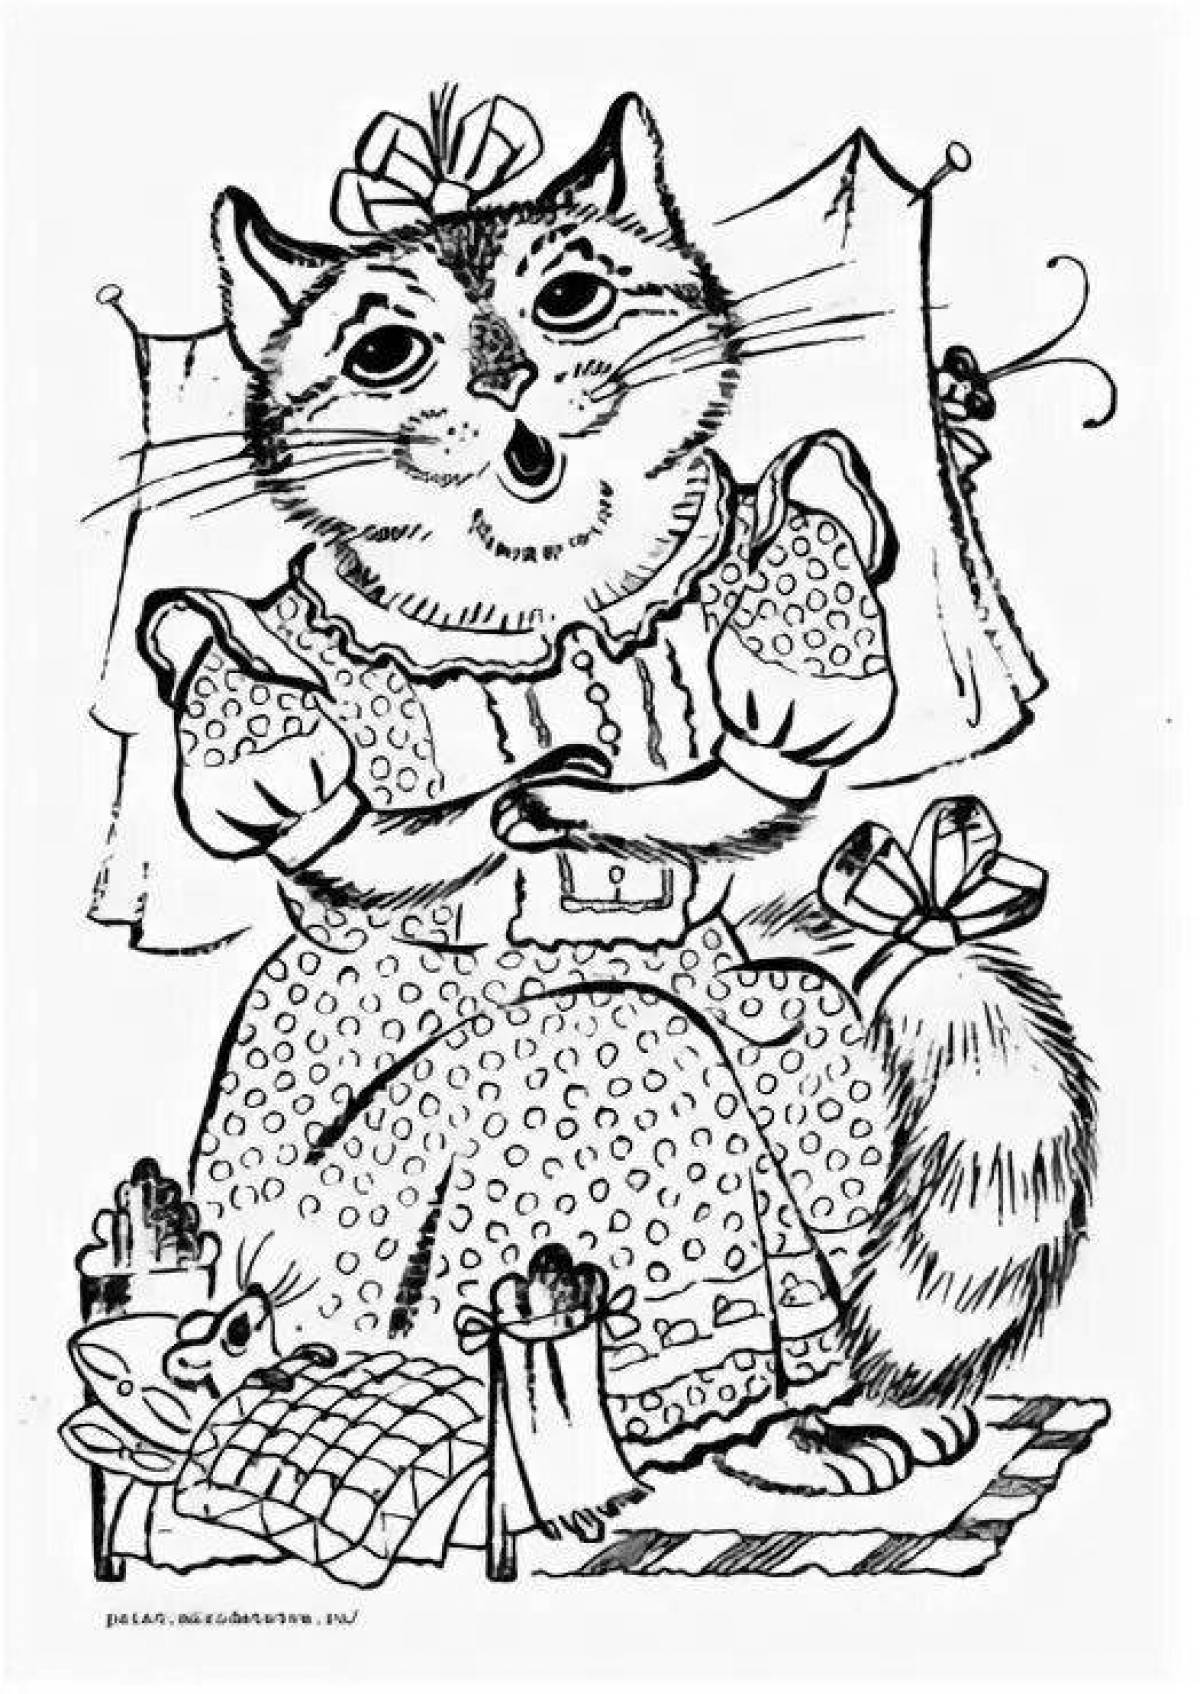 Fun coloring book tale of the silly little mouse